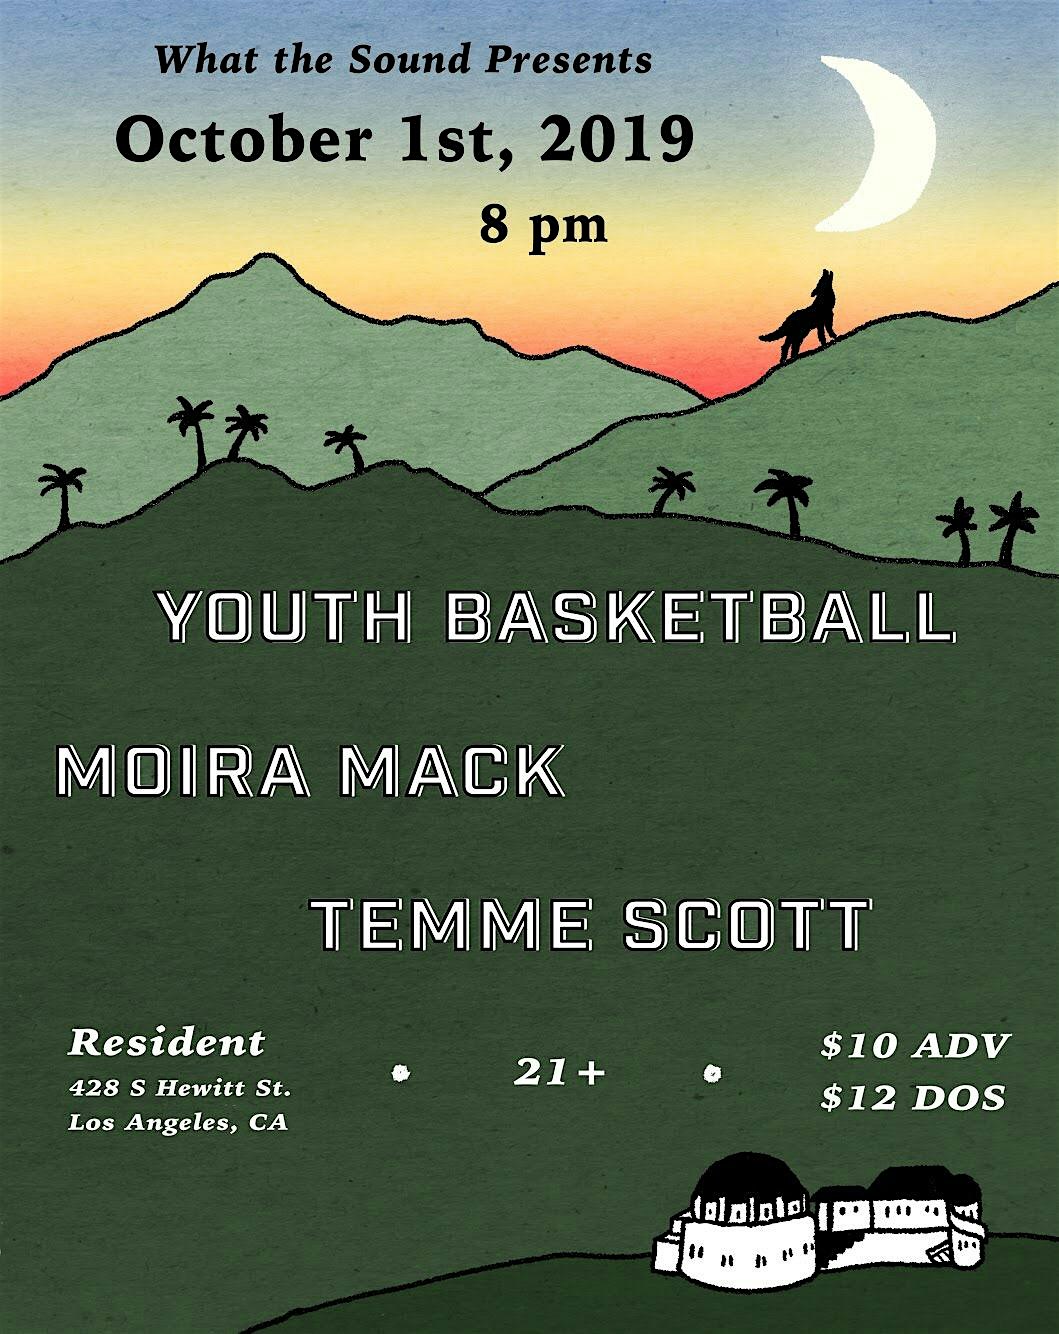 What The Sound Presents   Youth Basketball, Moira Mack, Temme Scott